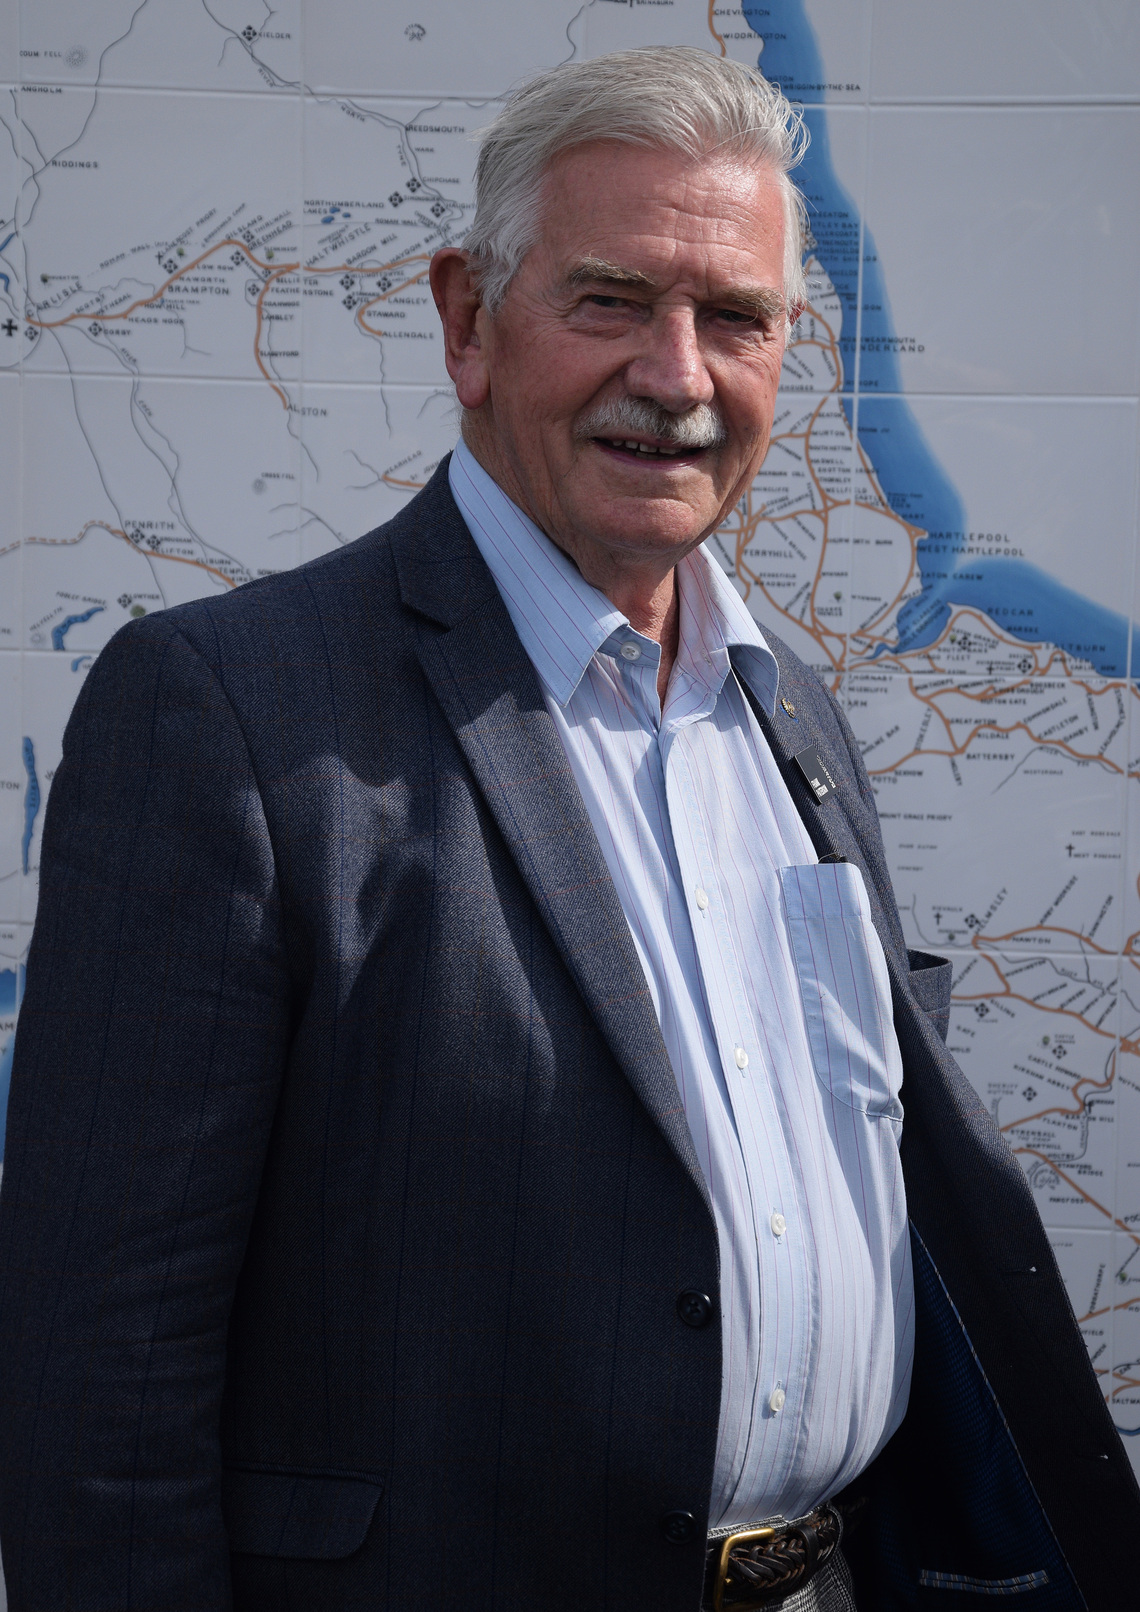 Heritage Day at Hunmanby, photo of Frank Paterson with North Eastern Railway Tile Map